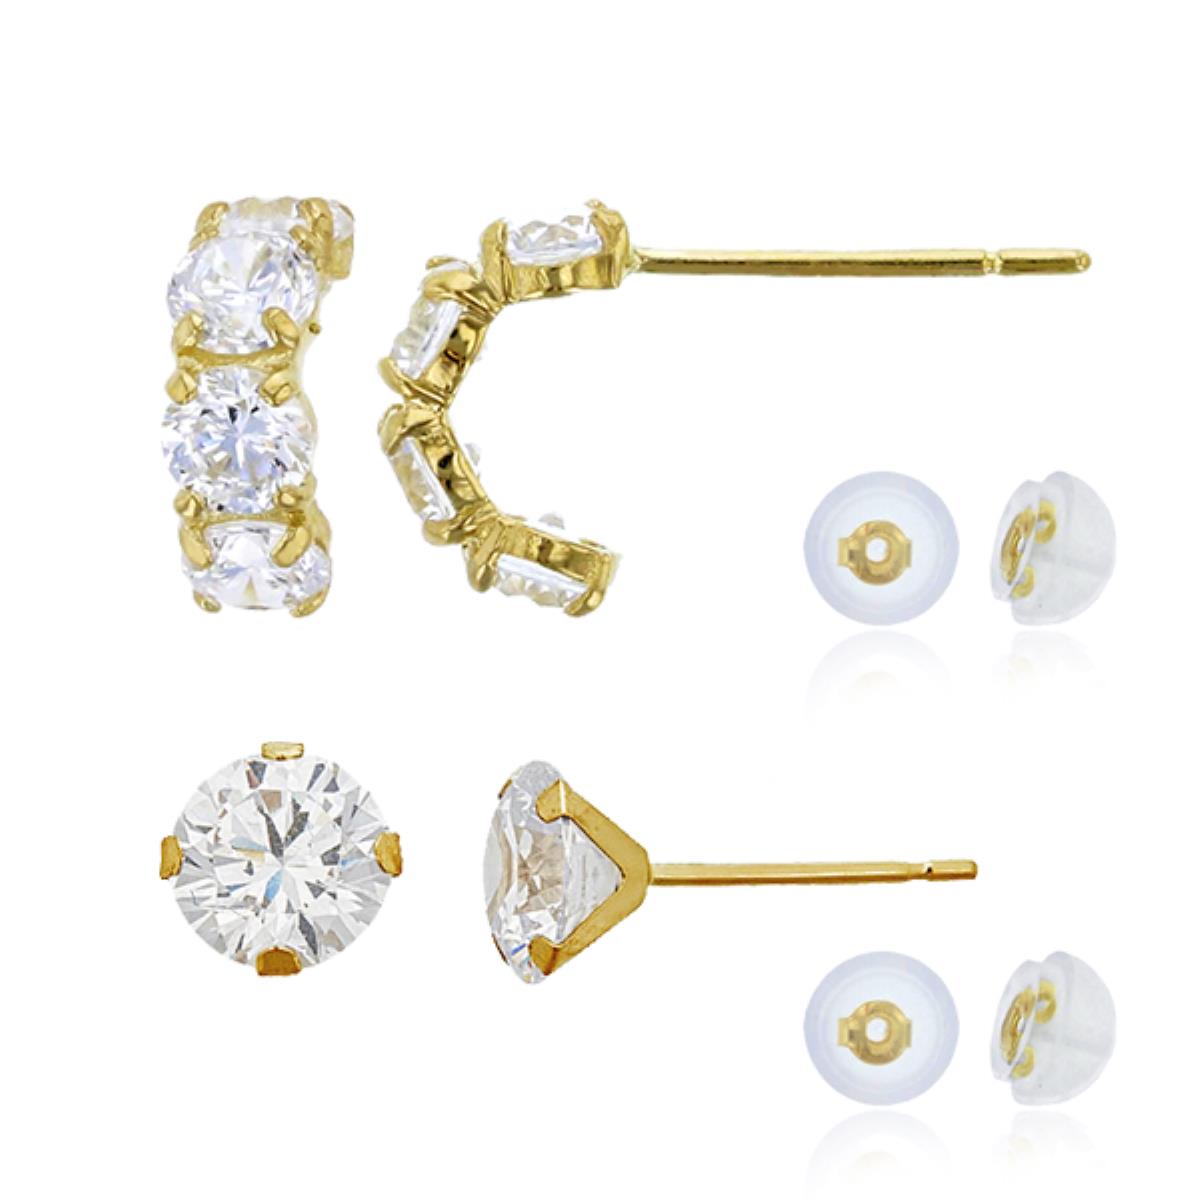 14K Yellow Gold 3mm Rd Prong 4-Stone Curved Stud & 6mm Rd Martini Solitaire Earring Set